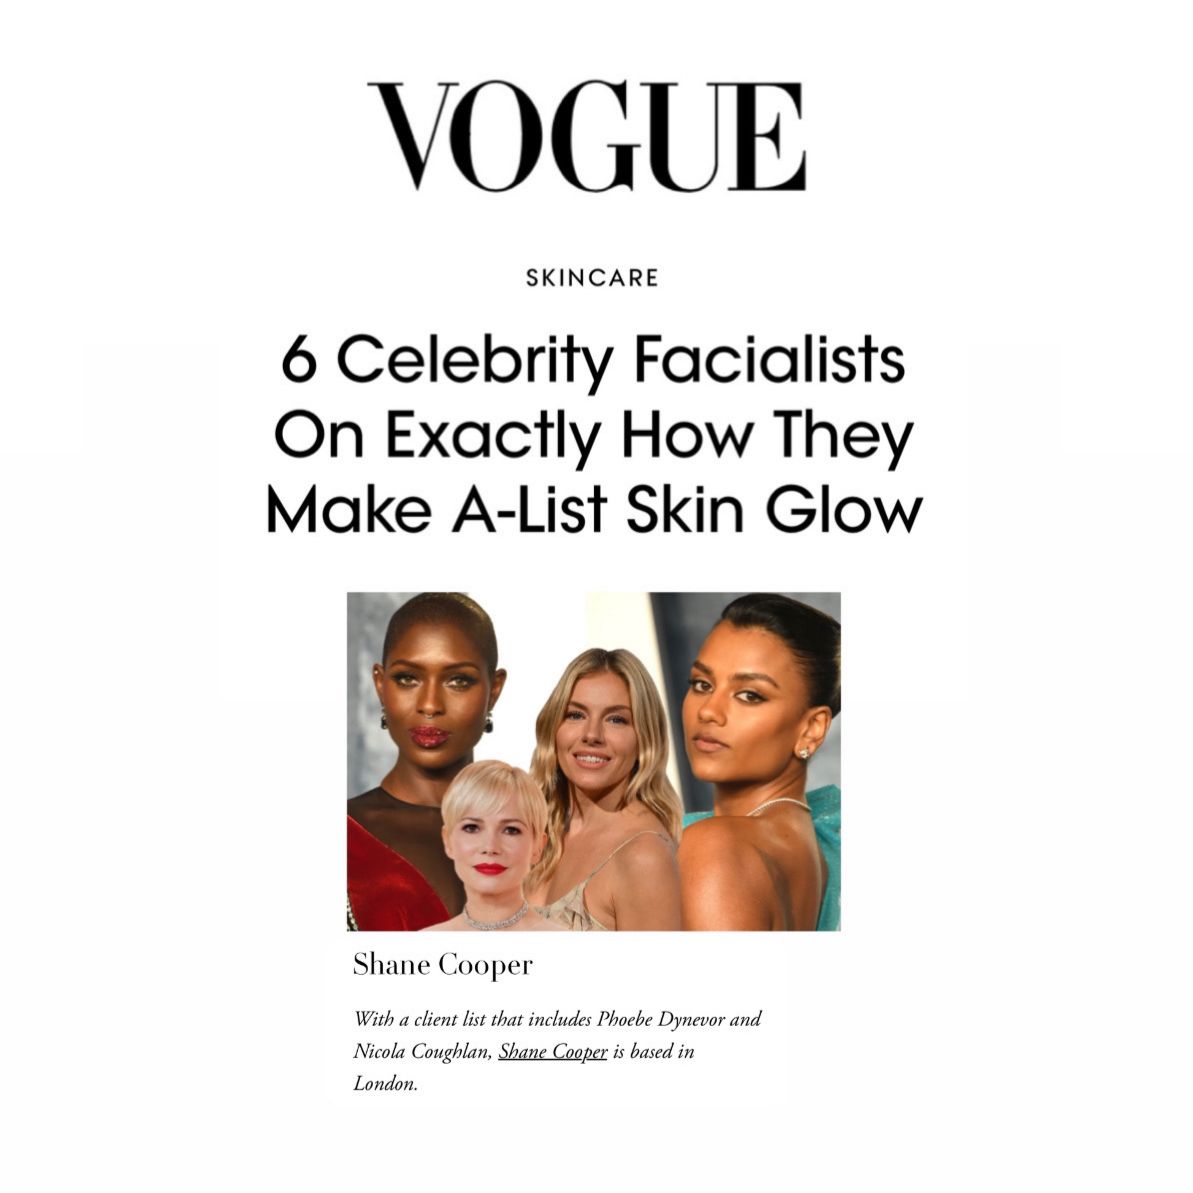 Shane Cooper Featured on Vogue: 6 Celebrity Facialists On Exactly How They Make A-List Skin Glow